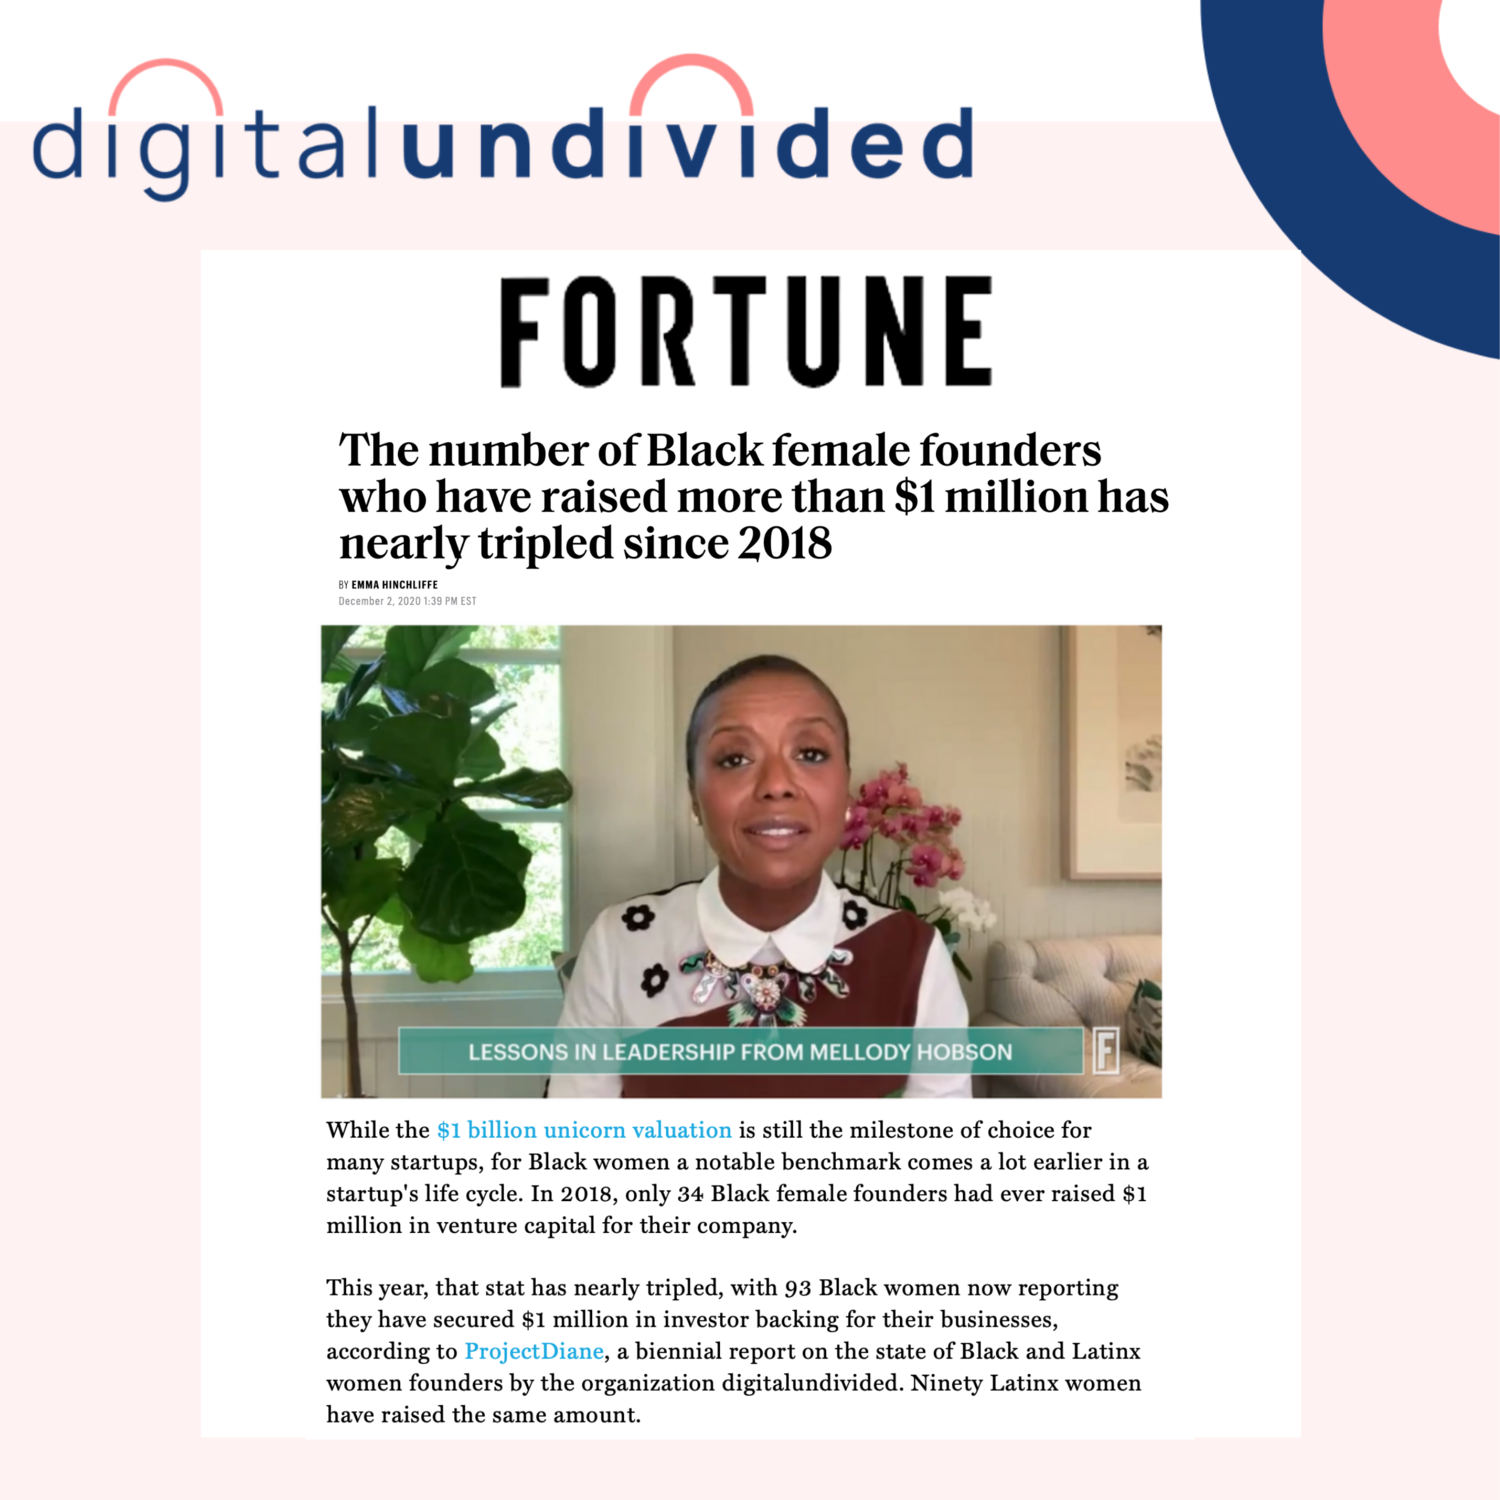 The number of Black female founders who have raised more than $1 million has nearly tripled since 2018